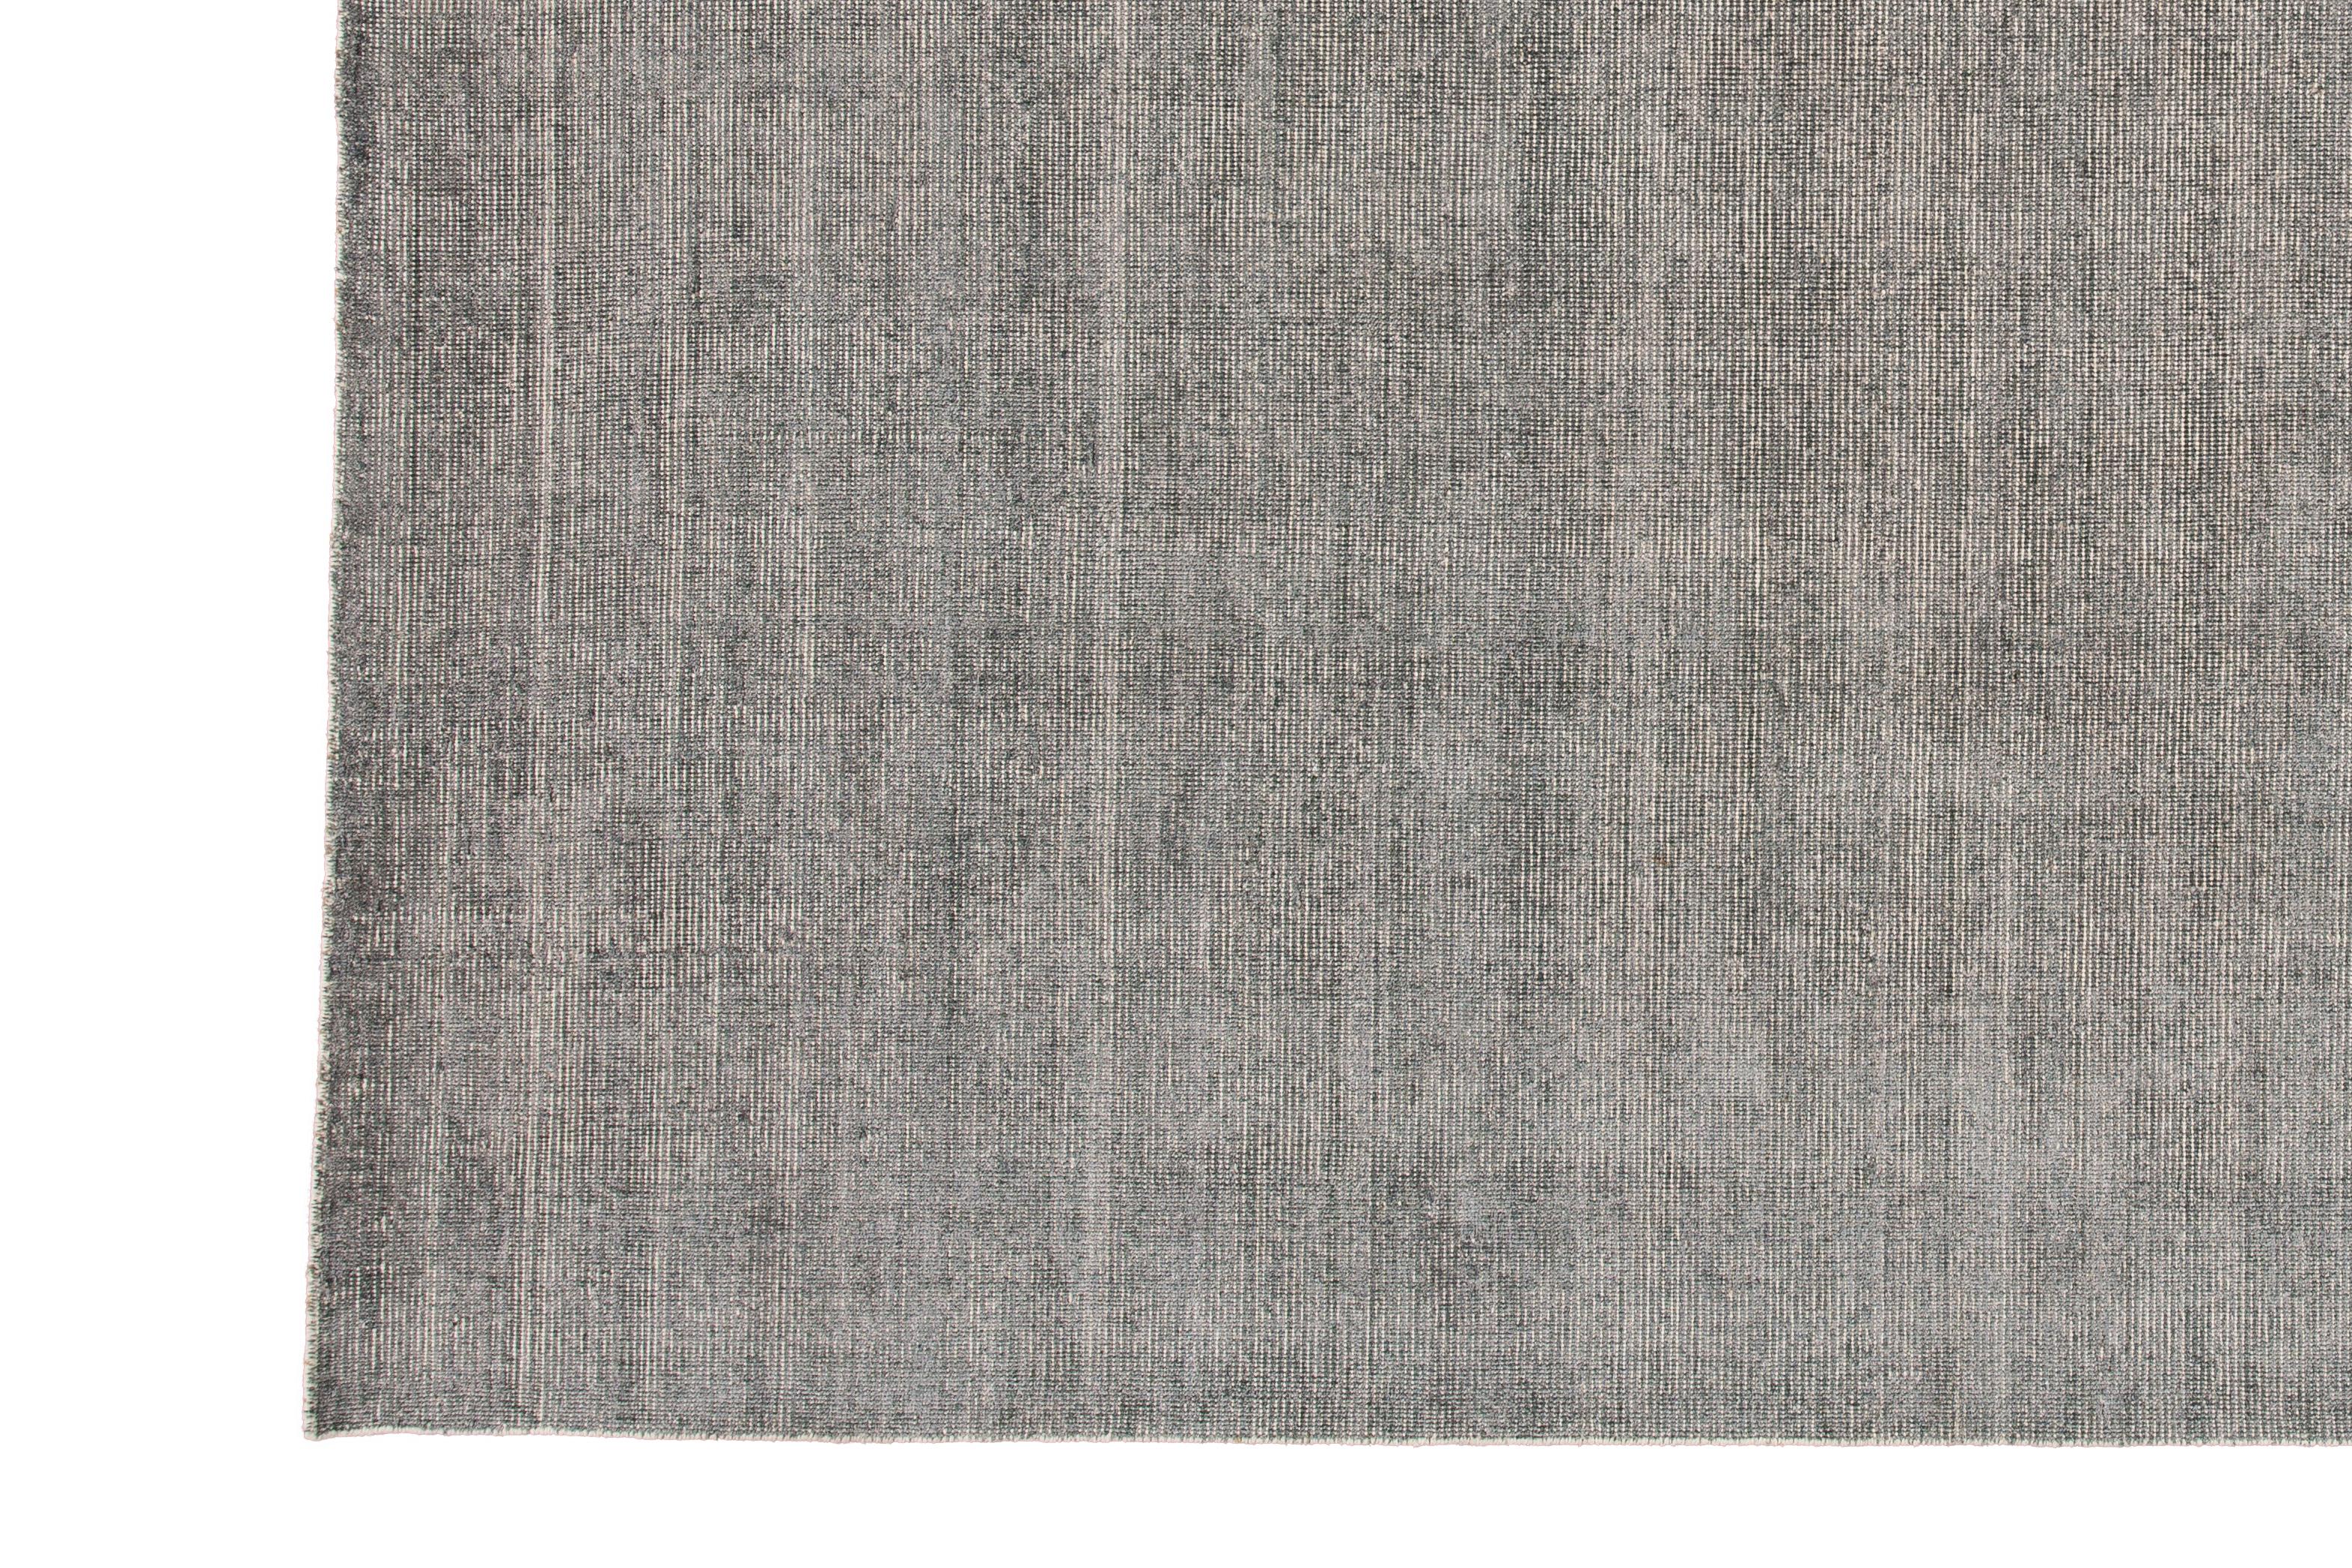 Beautiful modern Handmade Indian bamboo and silk boho rug with a gray field. This boho collection rug has an all-over solid design.

This rug measures: 10'0